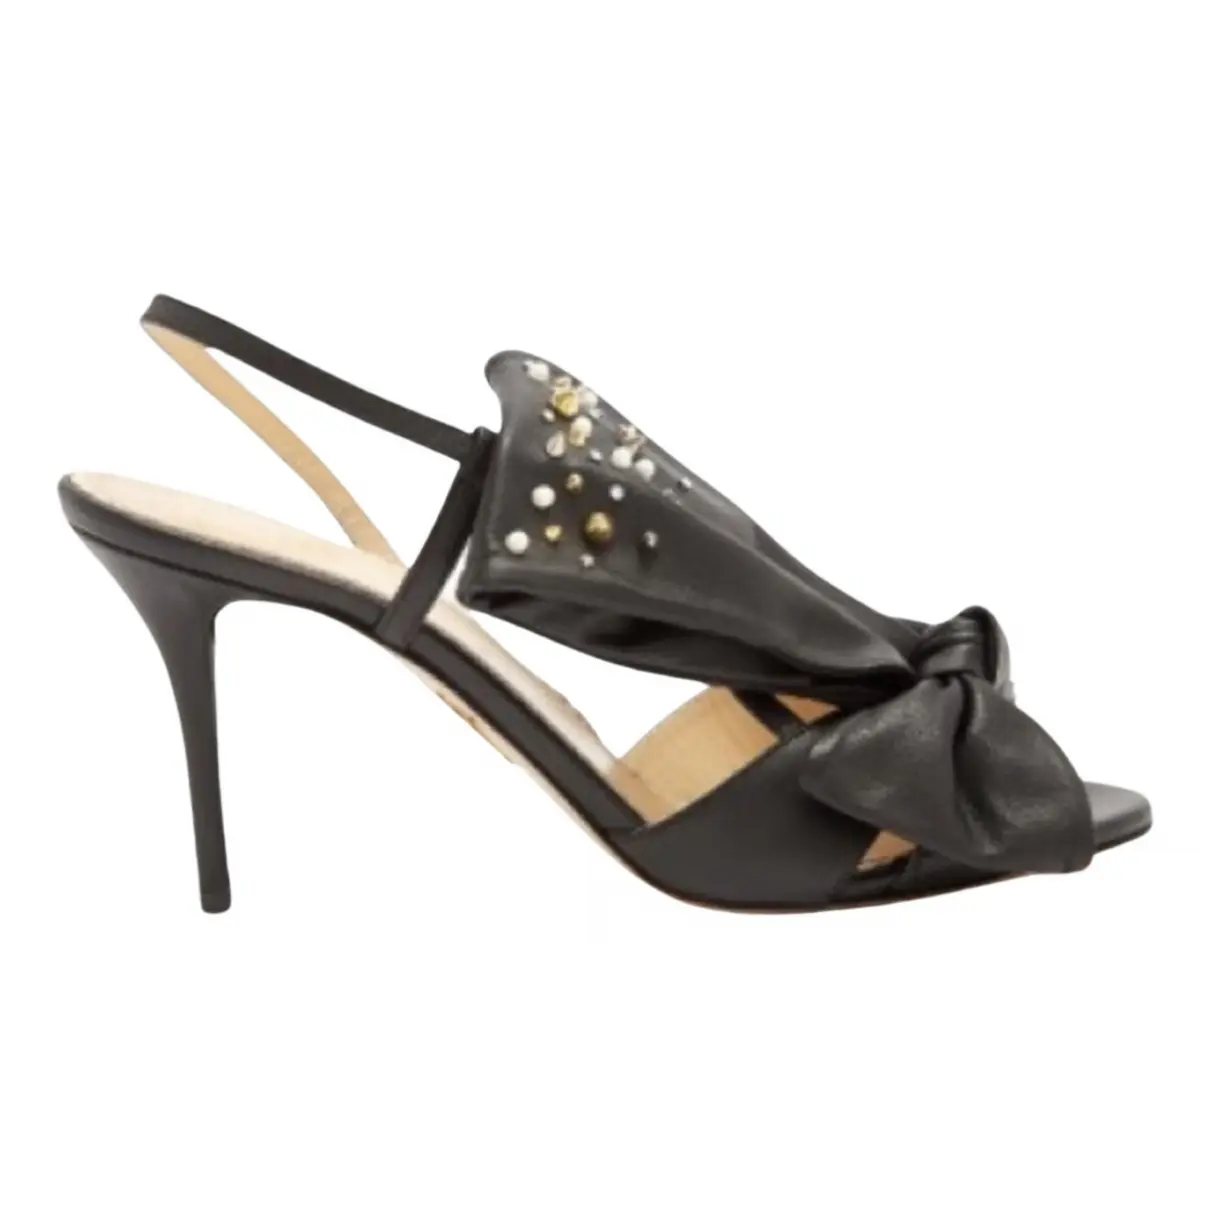 Kitty leather sandal Charlotte Olympia